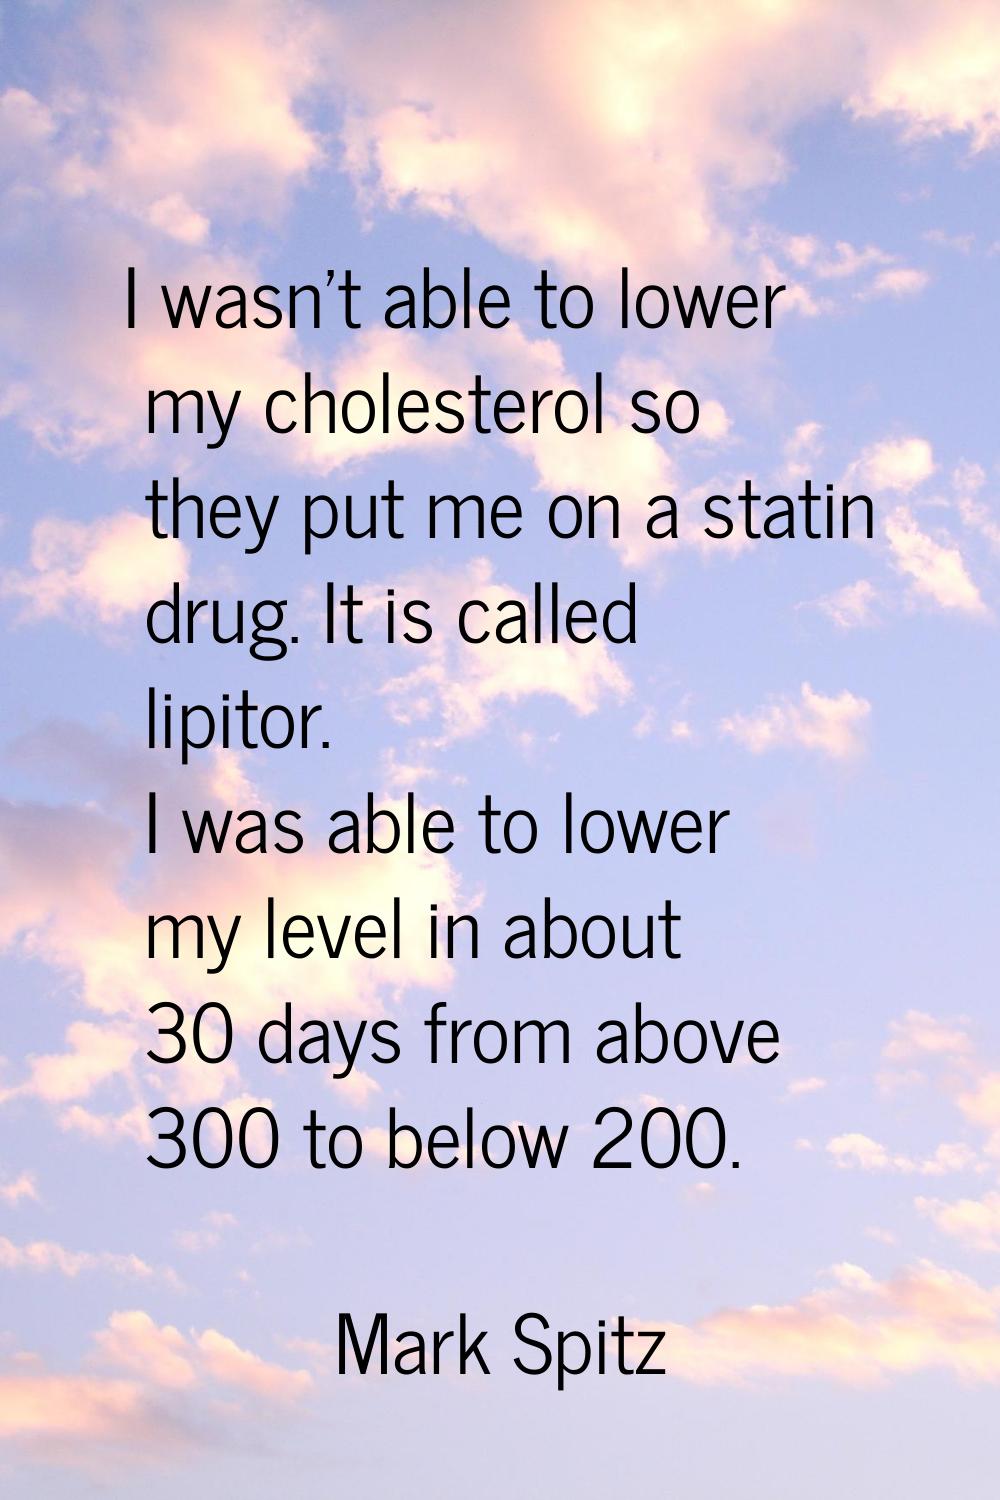 I wasn't able to lower my cholesterol so they put me on a statin drug. It is called lipitor. I was 